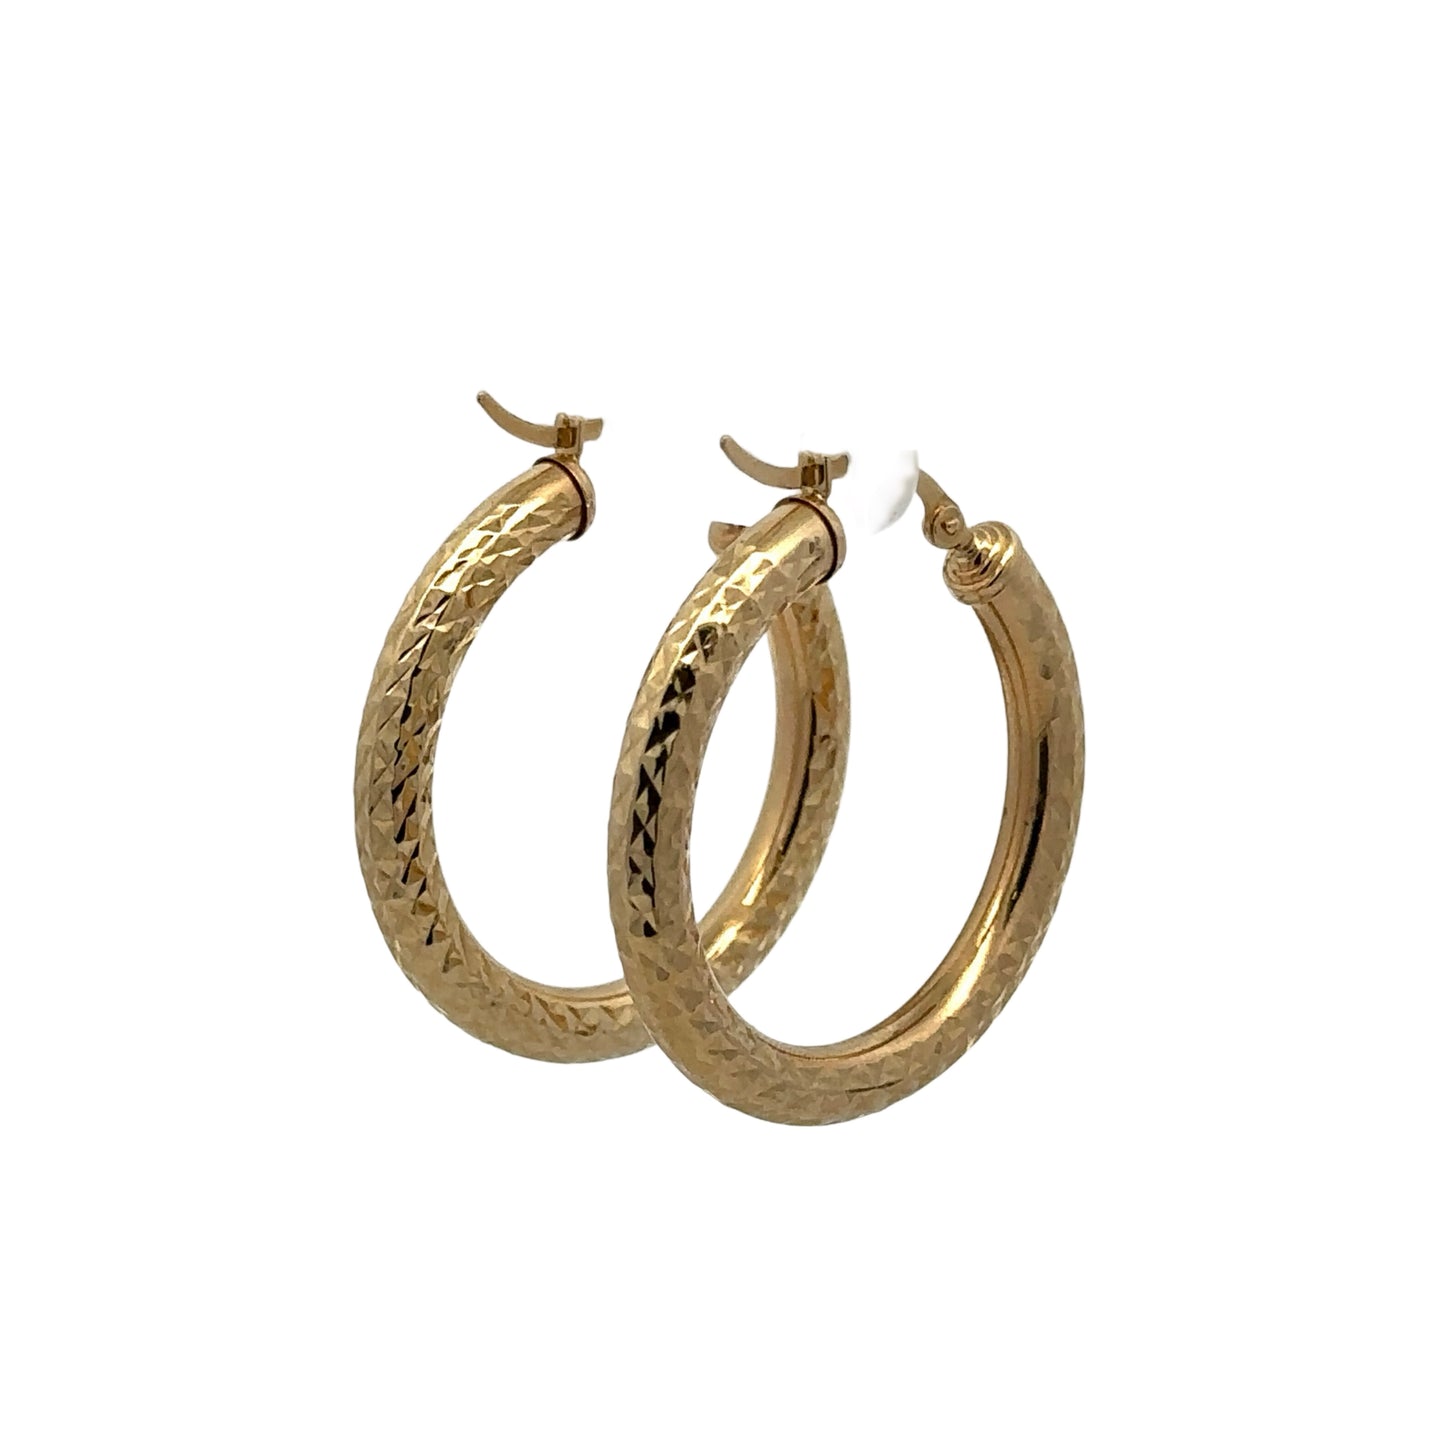 Diagonal back of yellow gold textured and polished hoops